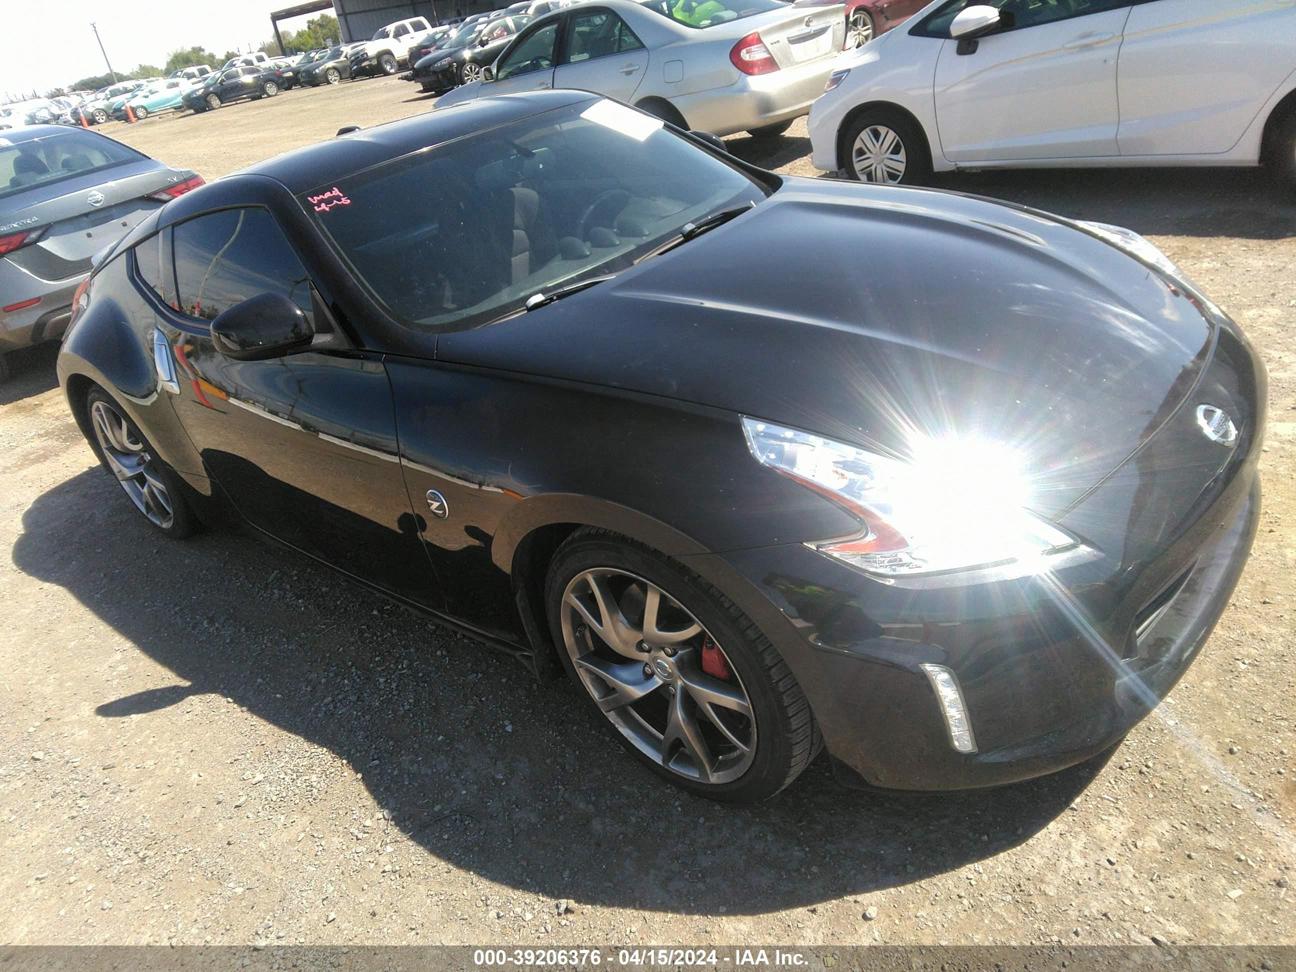 vin: JN1AZ4EH0GM931930 JN1AZ4EH0GM931930 2016 nissan 370z 3700 for Sale in 94565, 2780 Willow Pass Road, Bay Point, California, USA